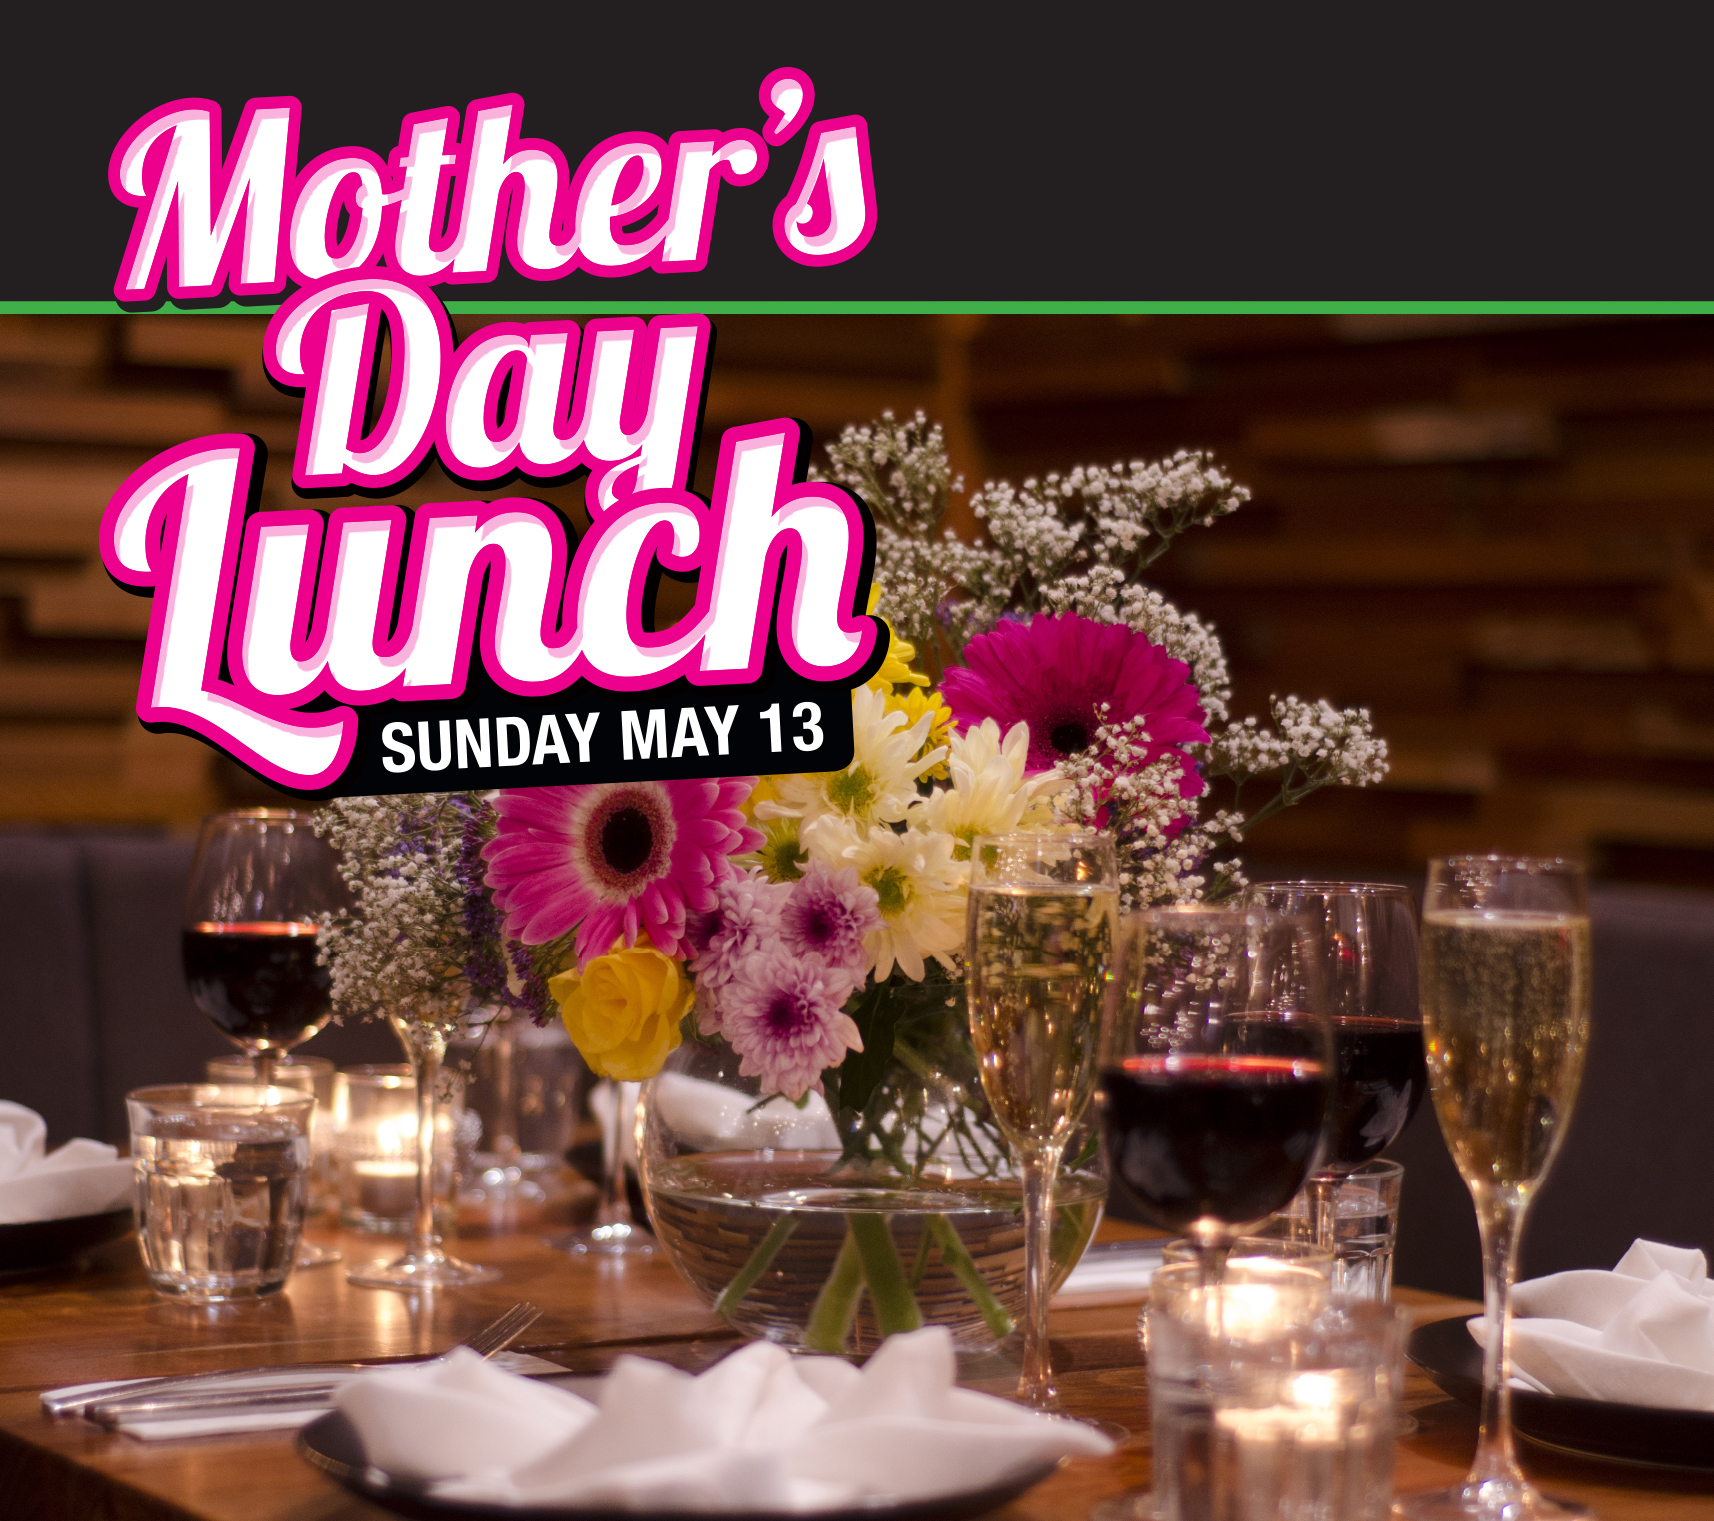 Mother's Day Lunch at Cabin 401 Bar and Grill Bibra Lake